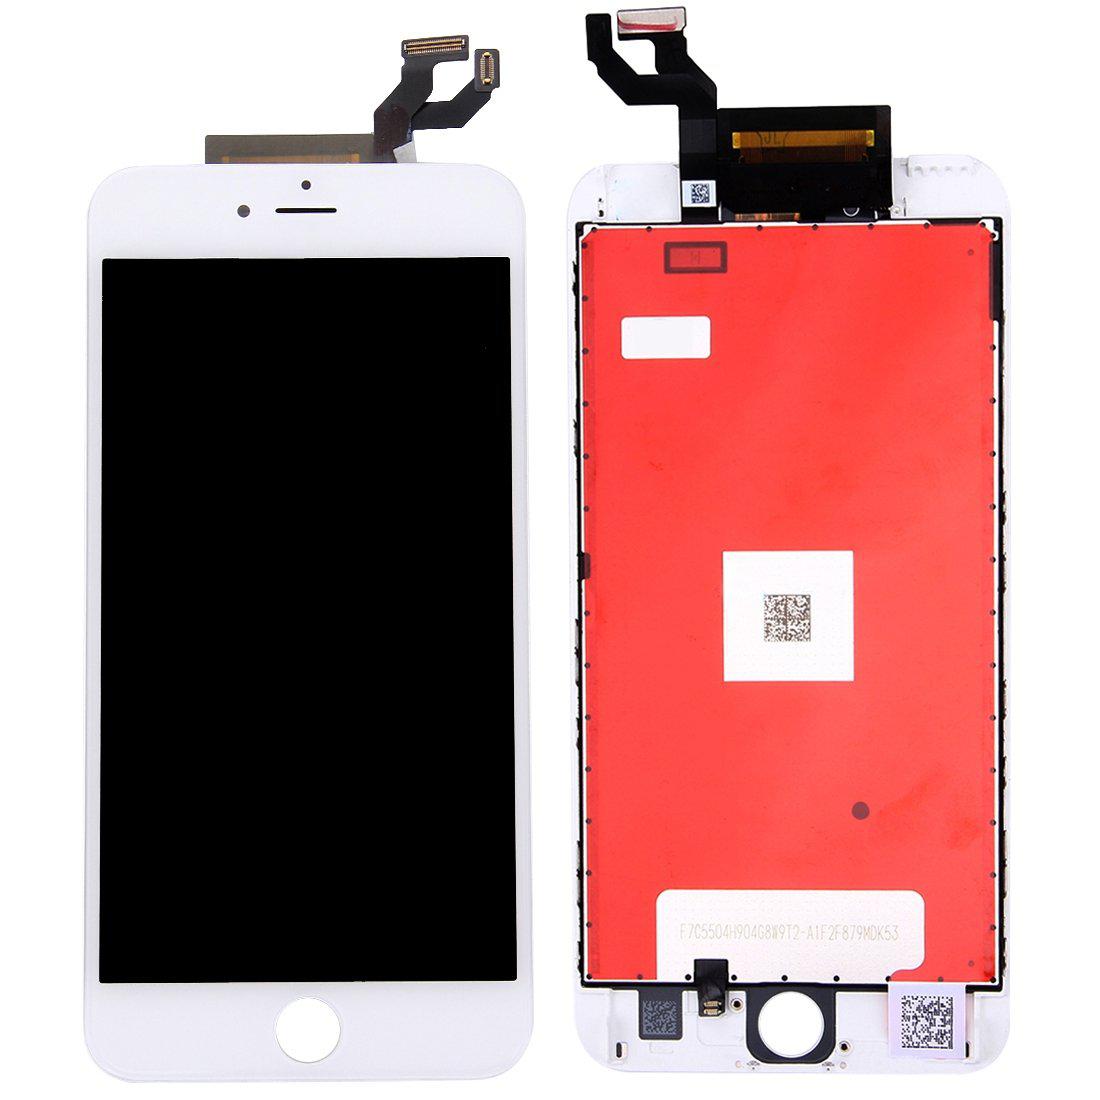 Apple iPhone 6s Plus 5.5" Replacement LCD Touch Screen Assembly - White for [product_price] - First Help Tech